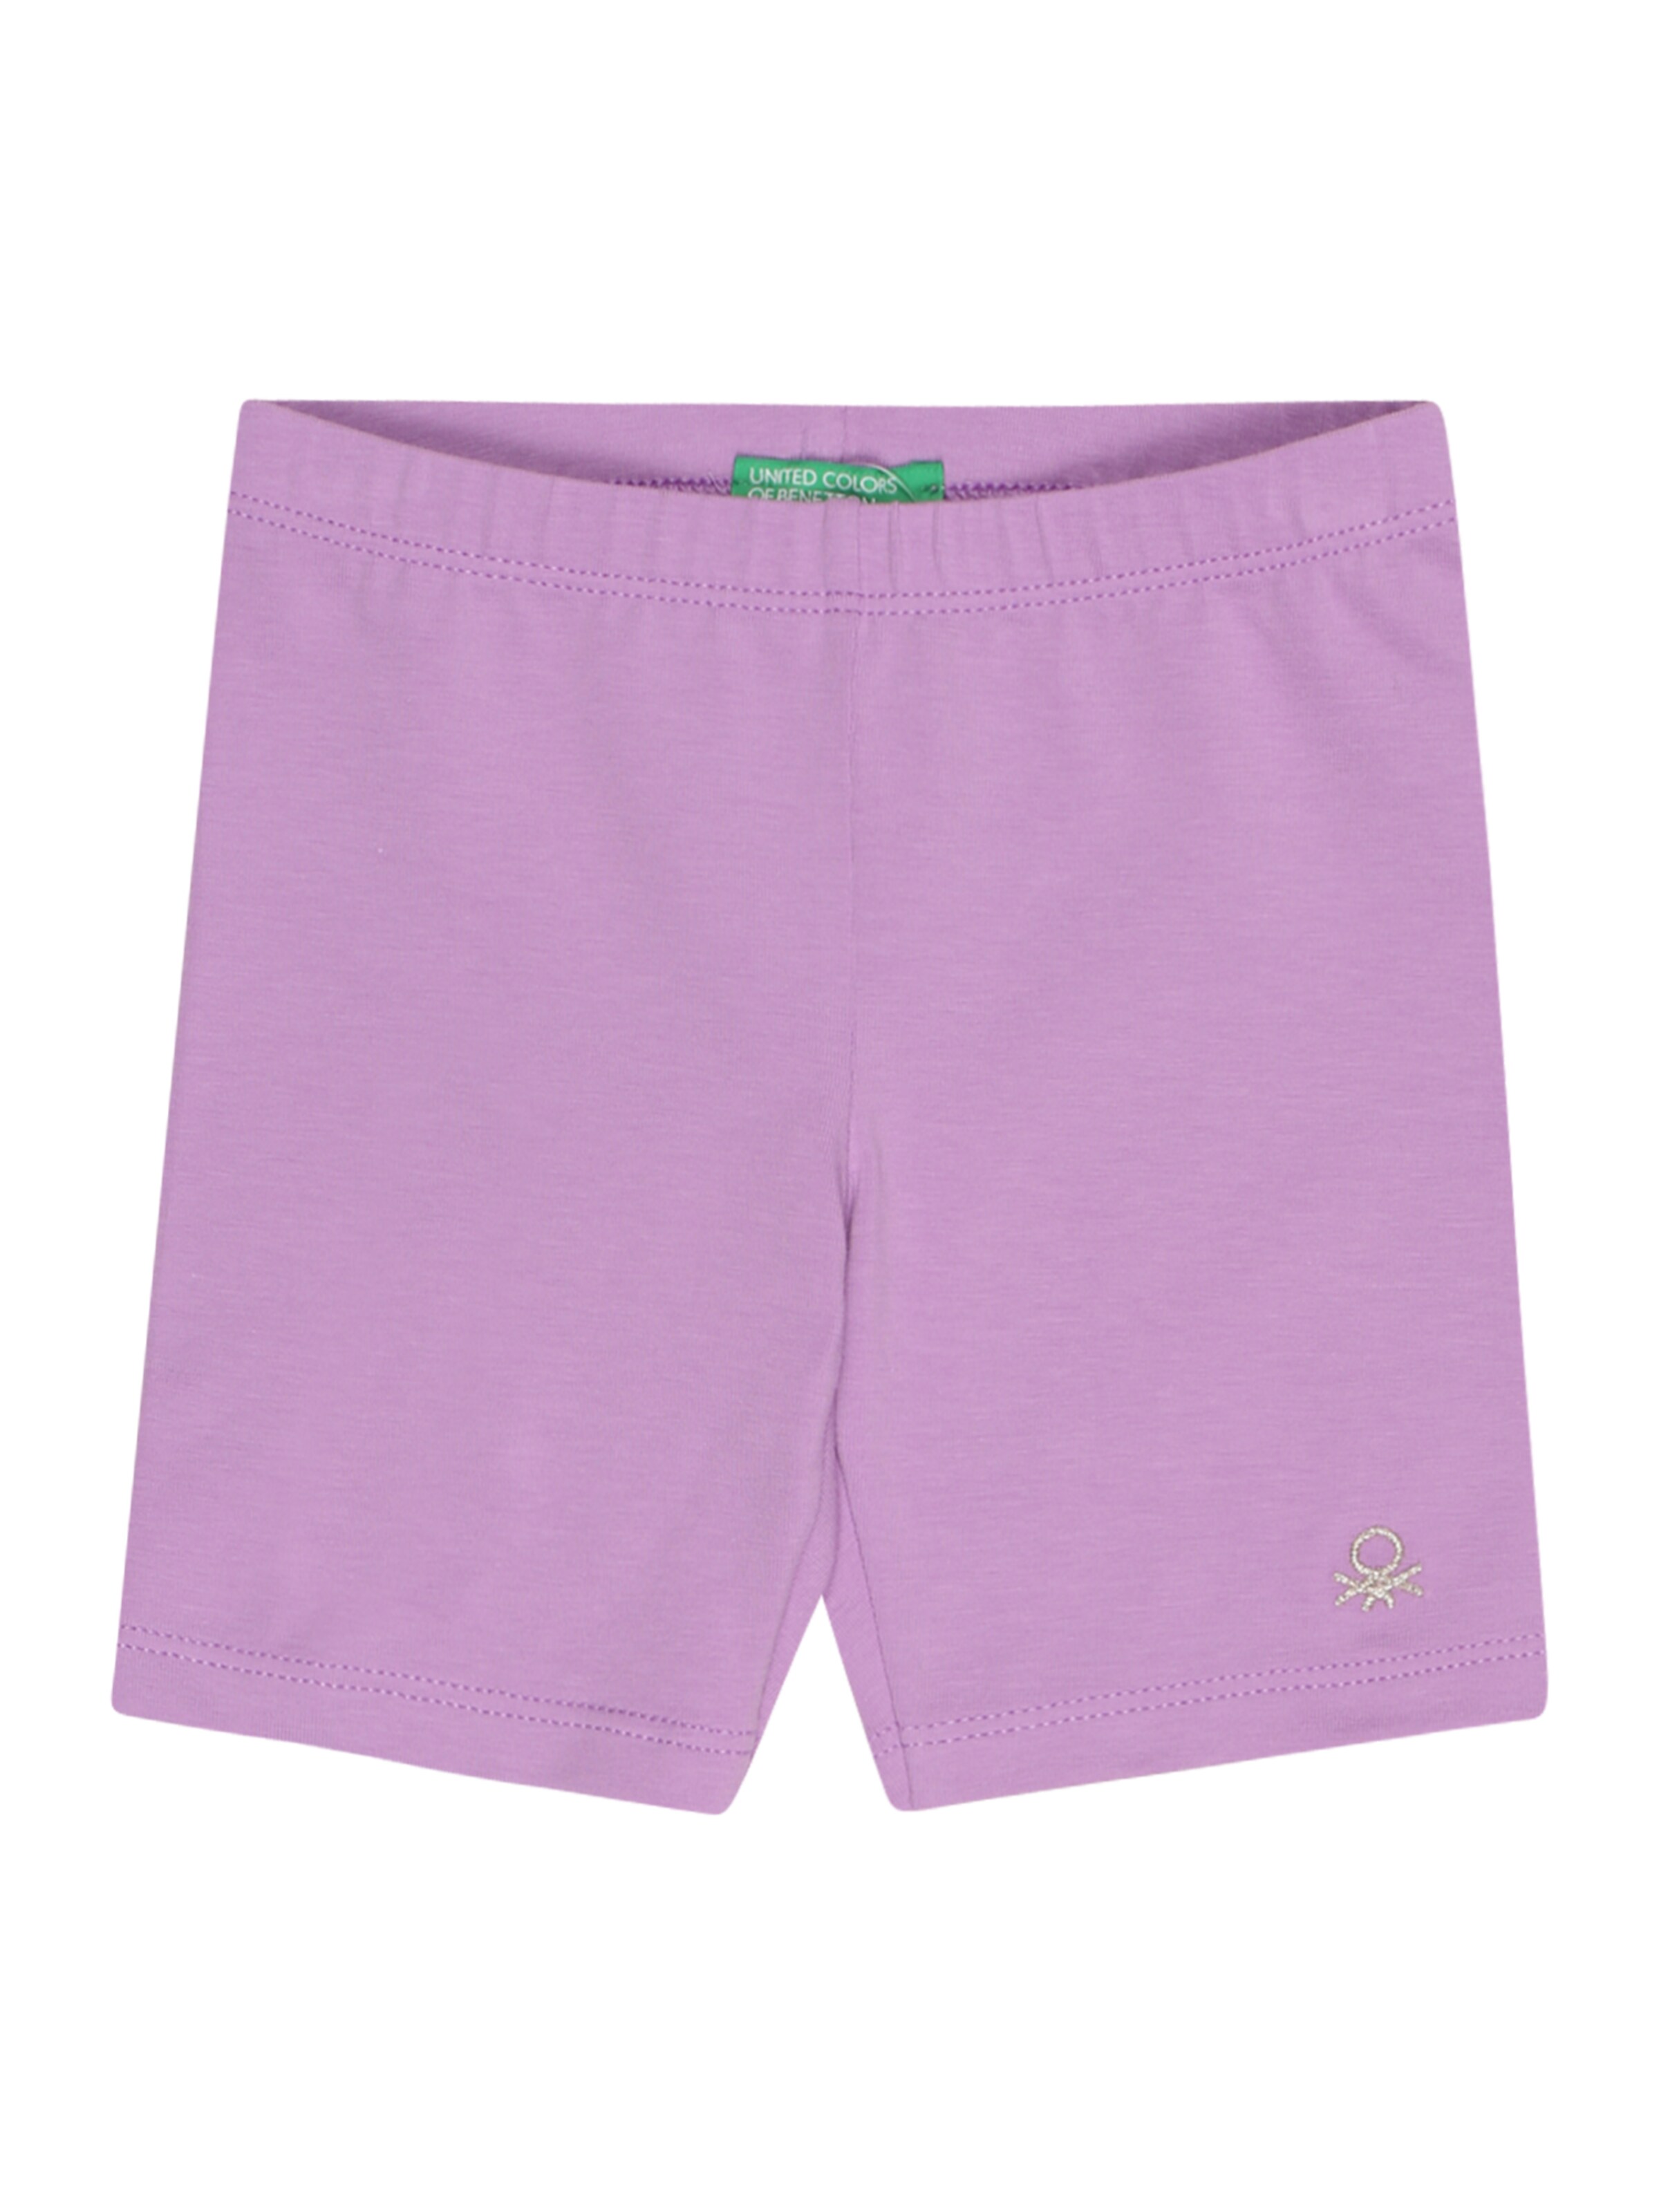 Kinder Bekleidung UNITED COLORS OF BENETTON Shorts in Lila - VH94418